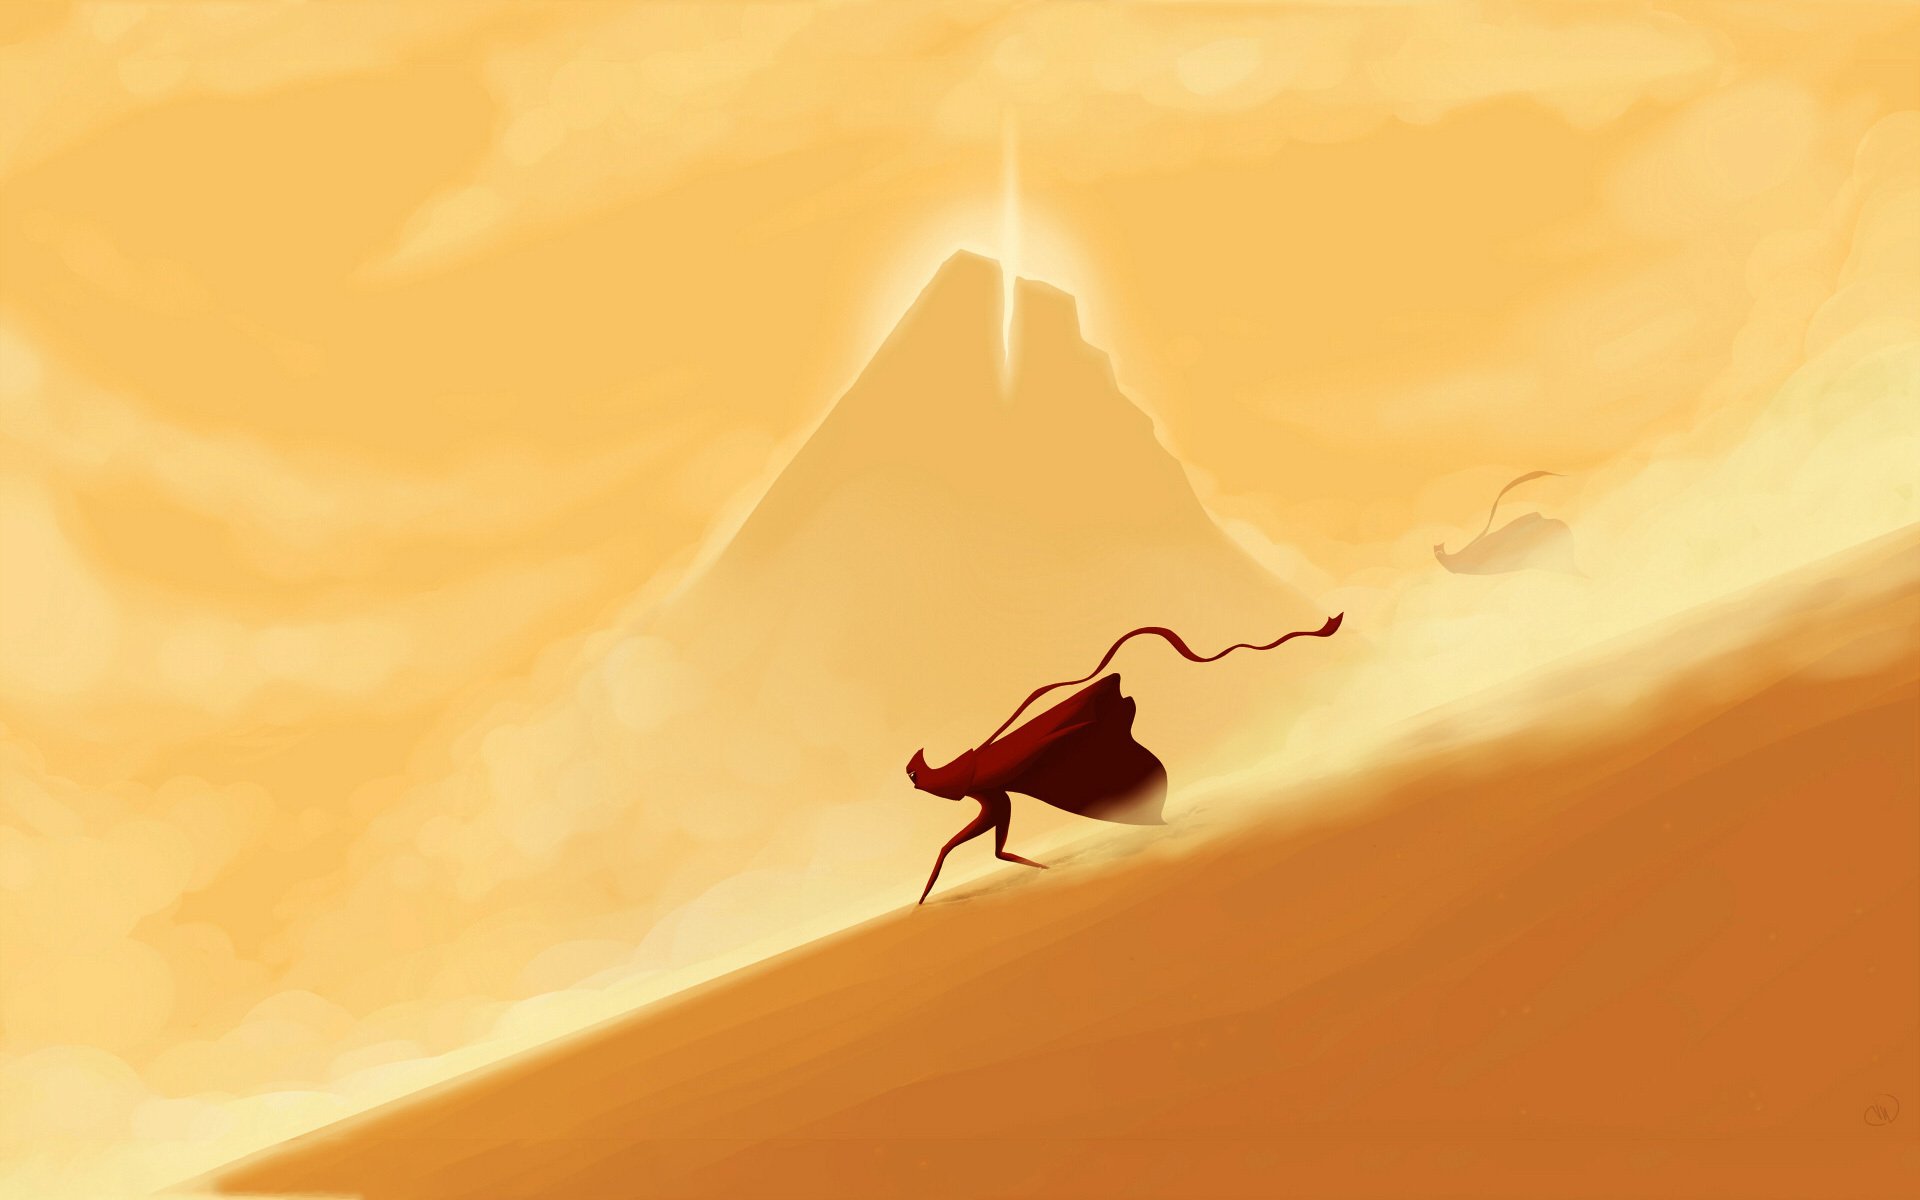 4541209 Journey game  Rare Gallery HD Wallpapers